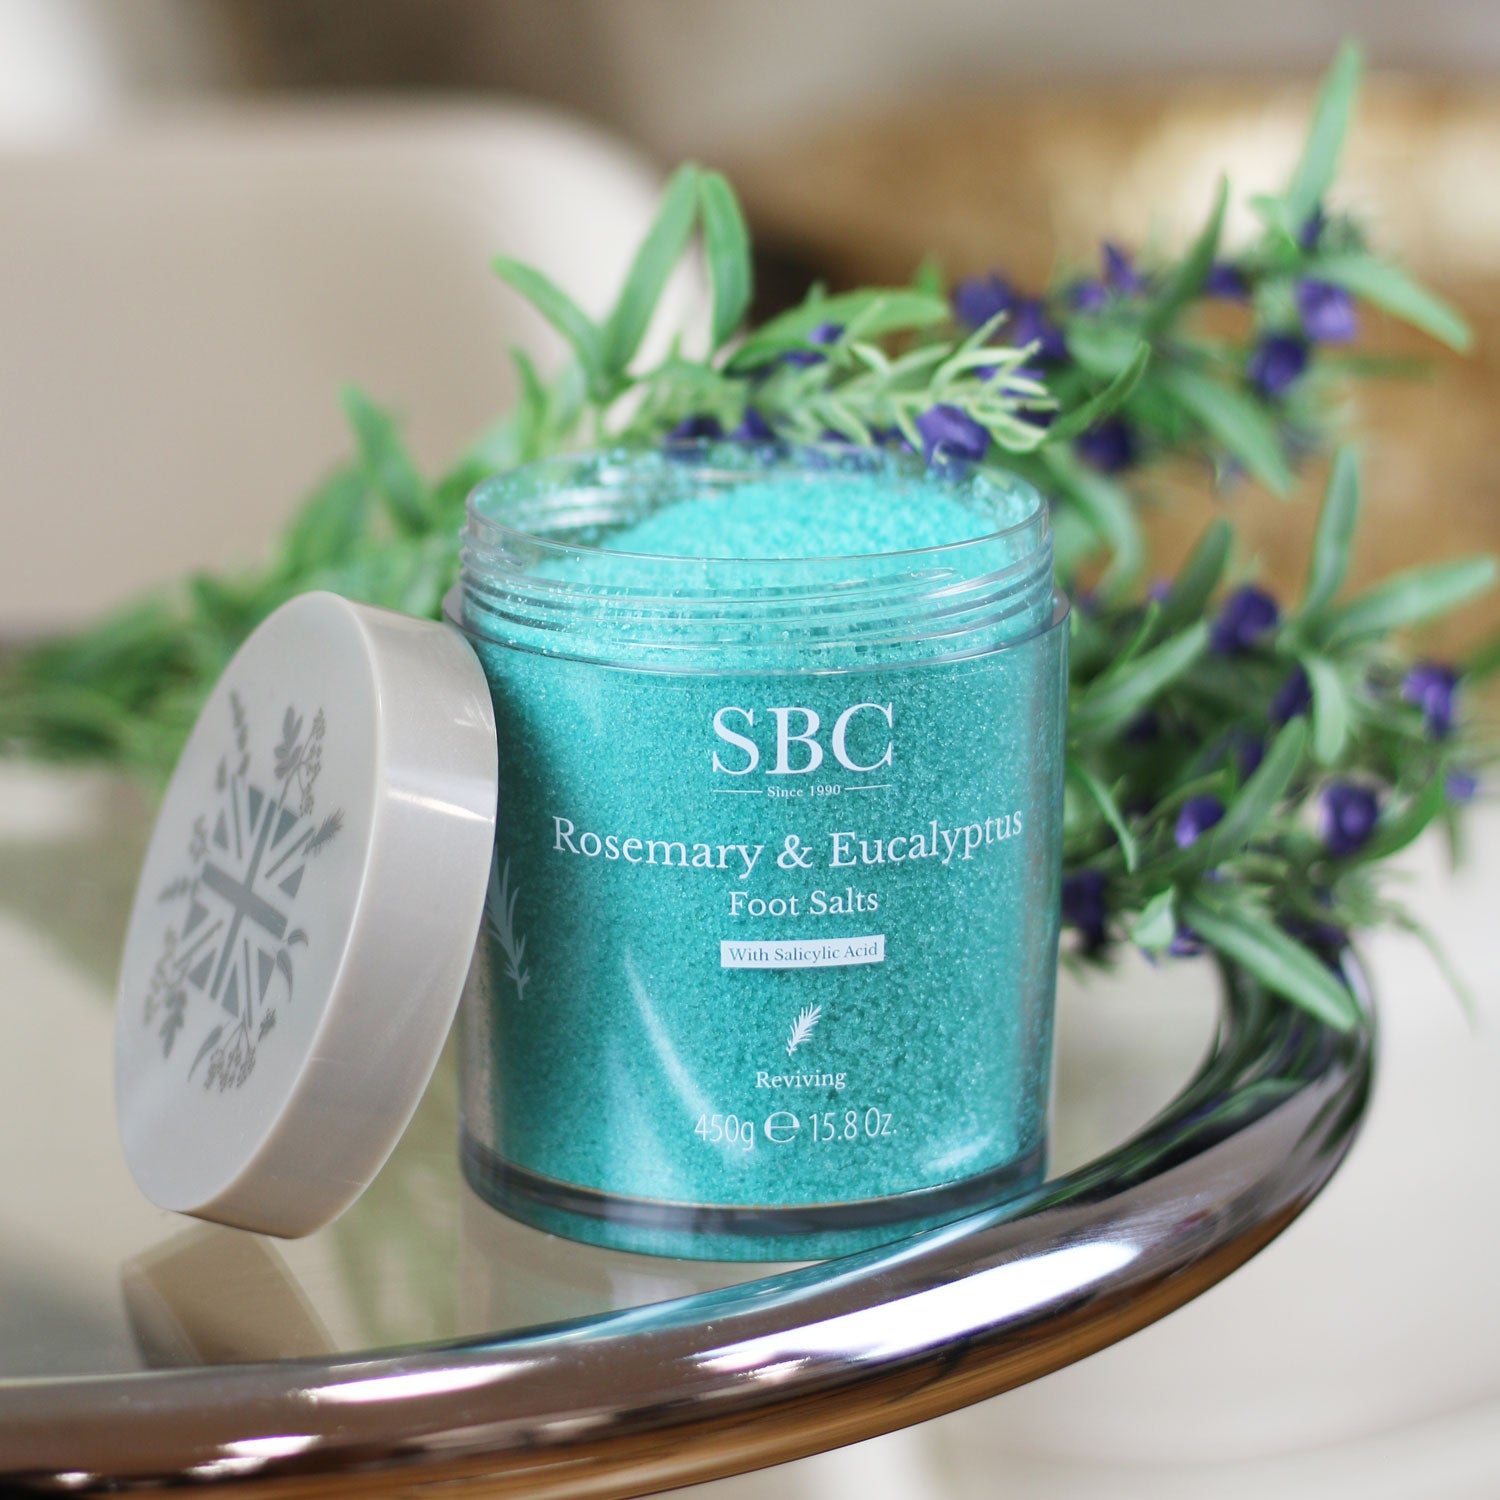 Rosemary & Eucalyptus Foot Salts on a glass table with flowering rosemary